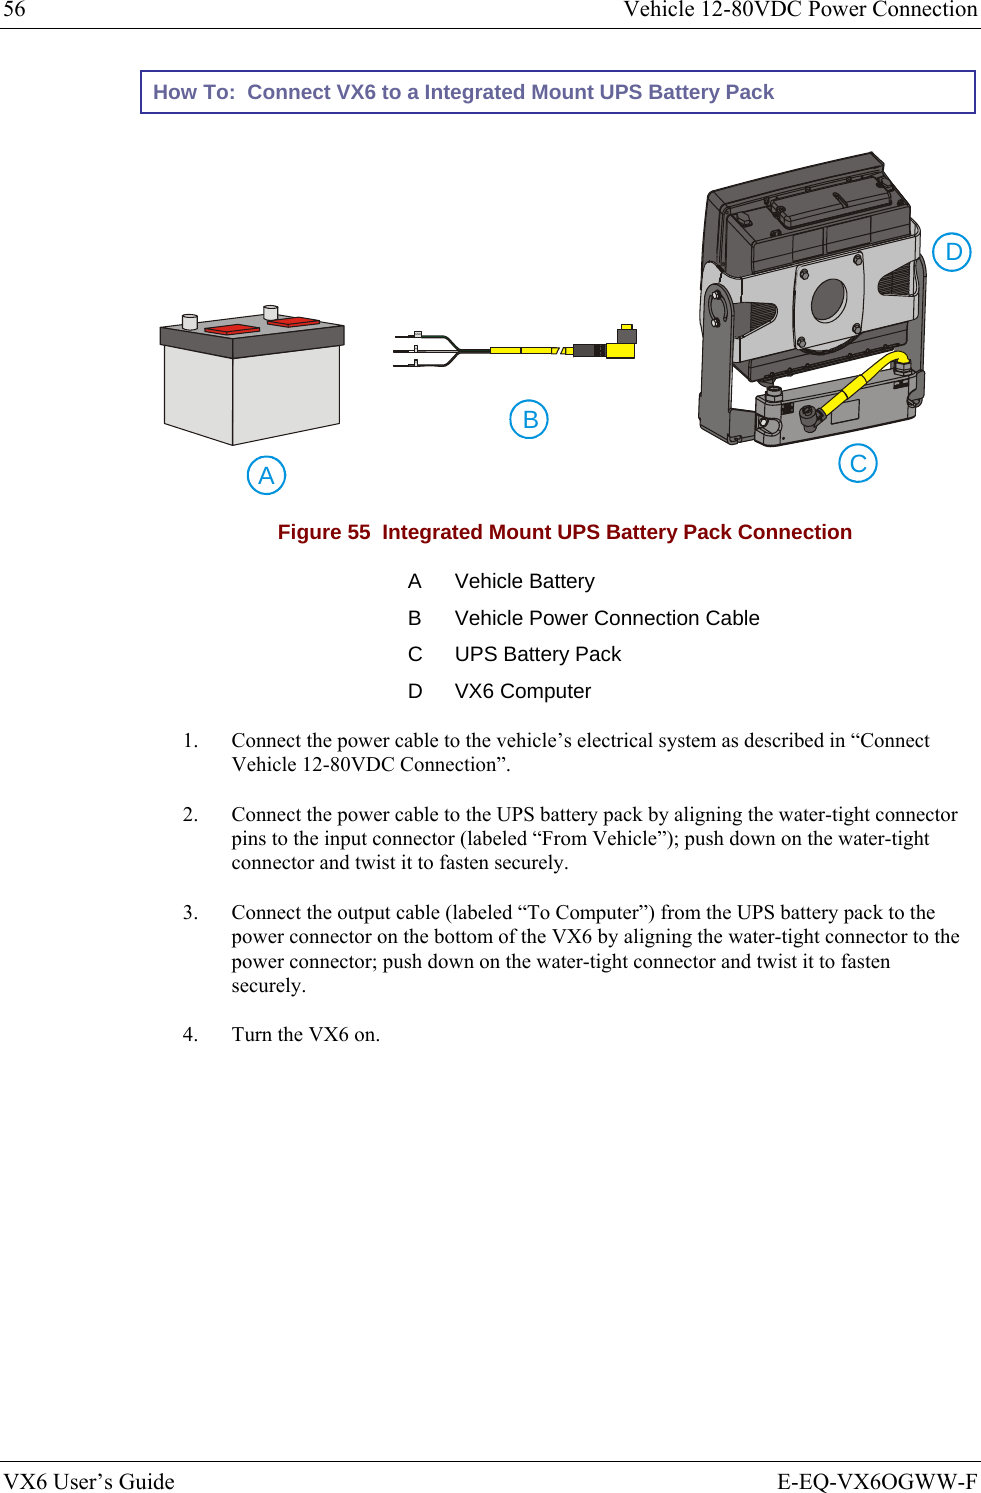 56  Vehicle 12-80VDC Power Connection VX6 User’s Guide  E-EQ-VX6OGWW-F How To:  Connect VX6 to a Integrated Mount UPS Battery Pack    ABGND+-CD Figure 55  Integrated Mount UPS Battery Pack Connection A Vehicle Battery B  Vehicle Power Connection Cable C  UPS Battery Pack D VX6 Computer 1.  Connect the power cable to the vehicle’s electrical system as described in “Connect Vehicle 12-80VDC Connection”. 2.  Connect the power cable to the UPS battery pack by aligning the water-tight connector pins to the input connector (labeled “From Vehicle”); push down on the water-tight connector and twist it to fasten securely. 3.  Connect the output cable (labeled “To Computer”) from the UPS battery pack to the power connector on the bottom of the VX6 by aligning the water-tight connector to the power connector; push down on the water-tight connector and twist it to fasten securely. 4.  Turn the VX6 on.  